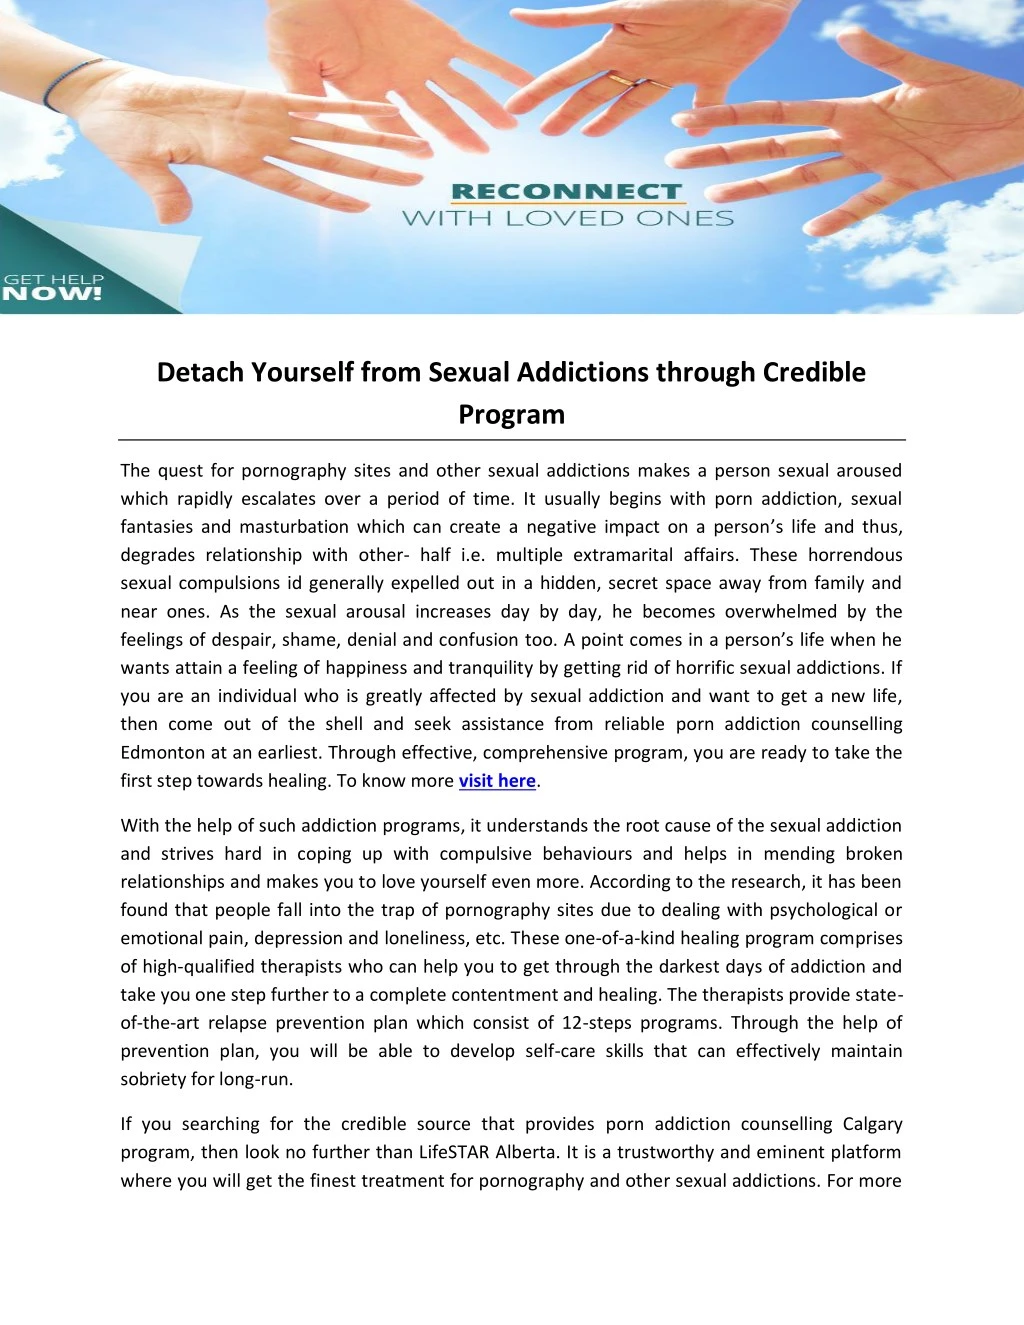 detach yourself from sexual addictions through